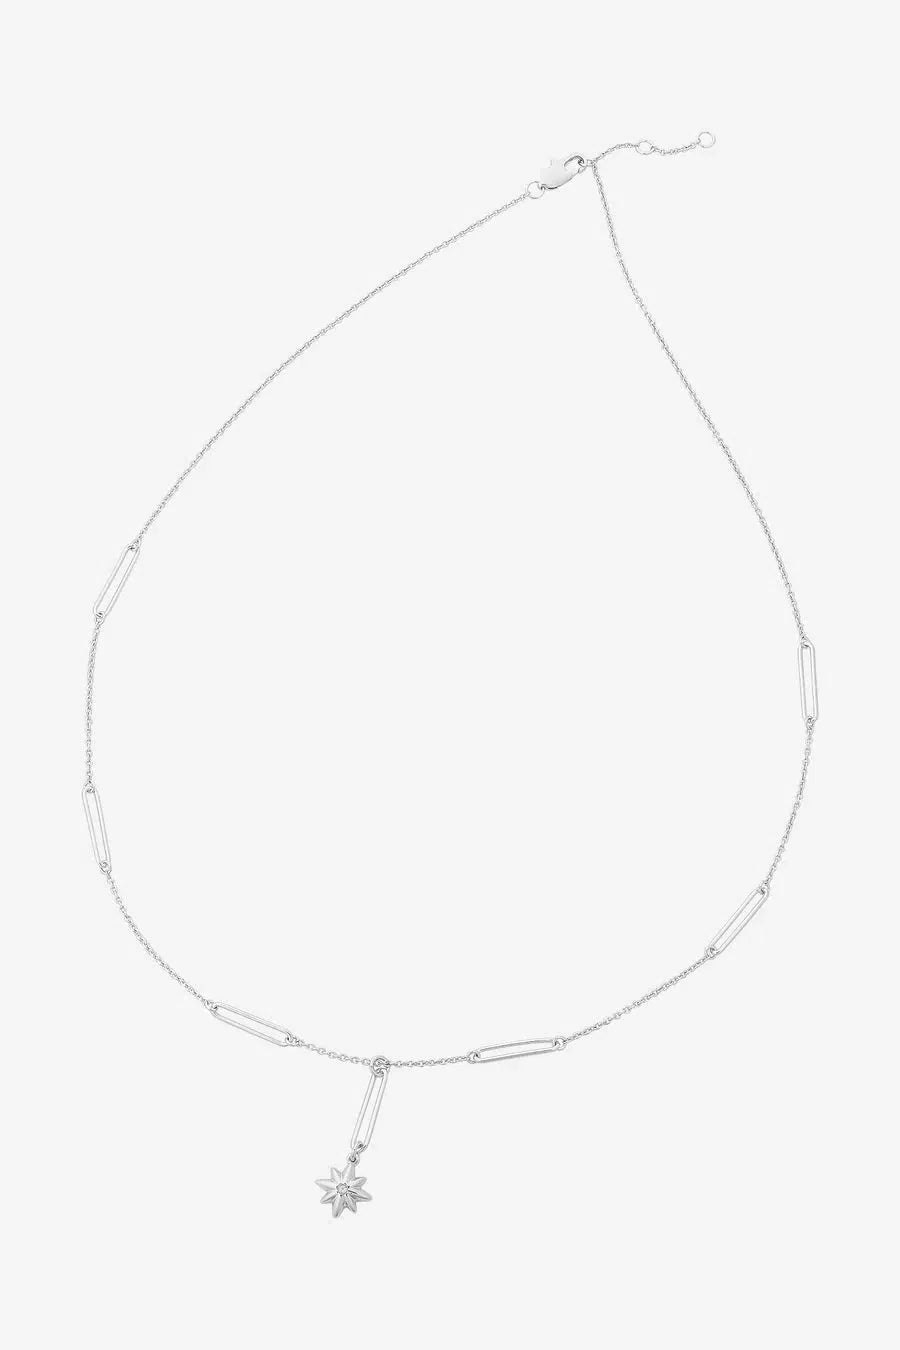 Issy Silver Necklace-Lima & Co-Lima & Co